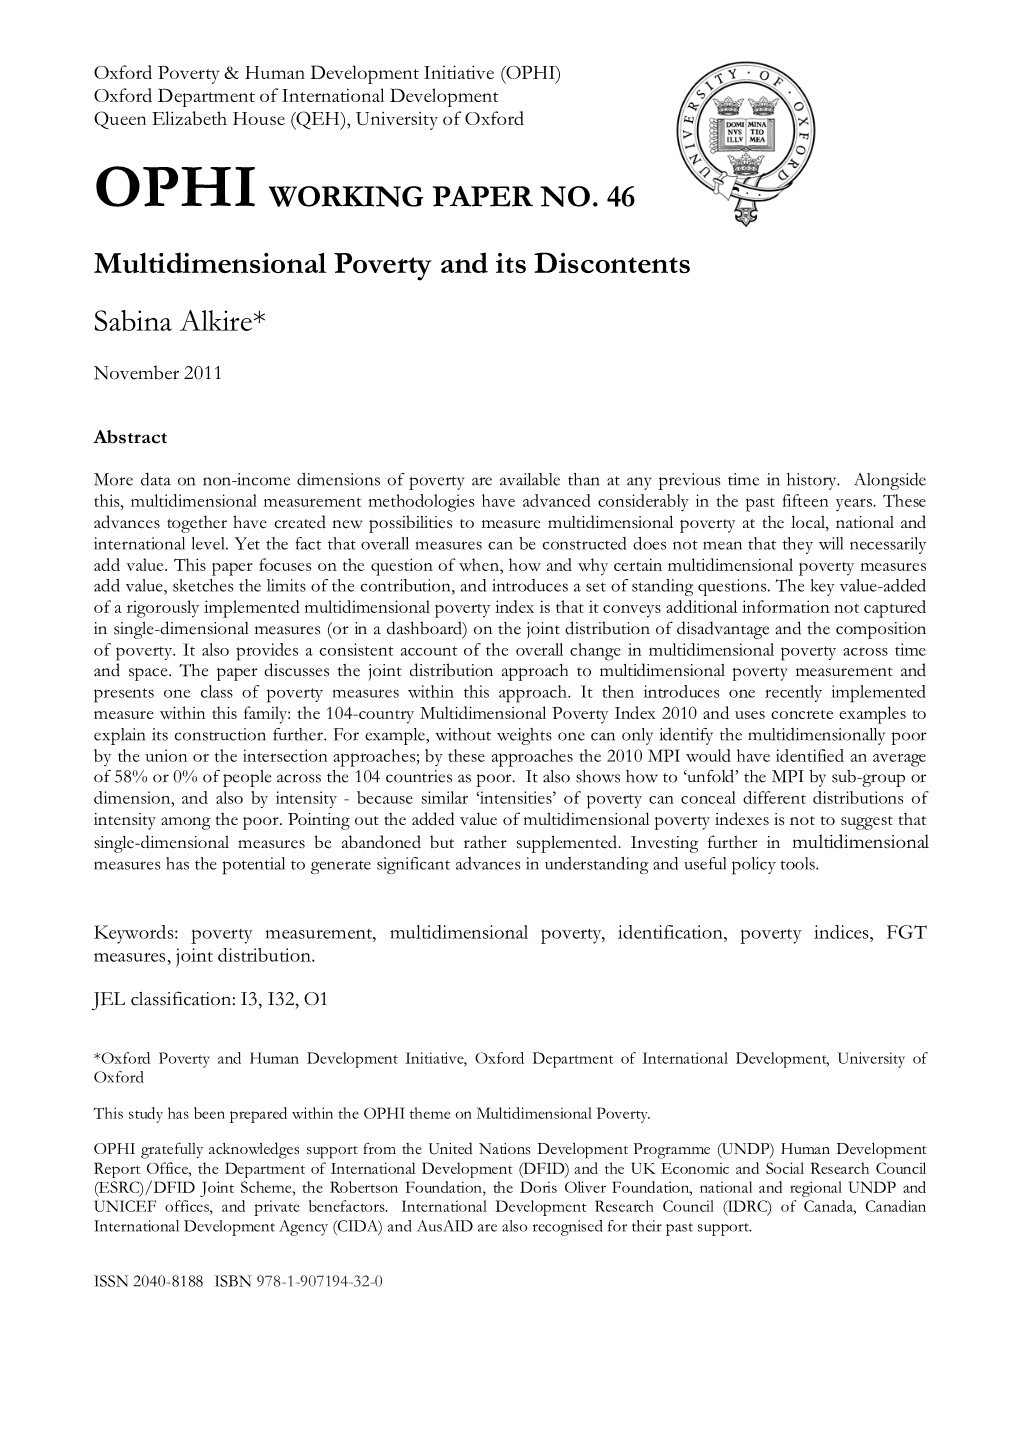 OPHIWORKING PAPER NO. 46 Multidimensional Poverty and Its